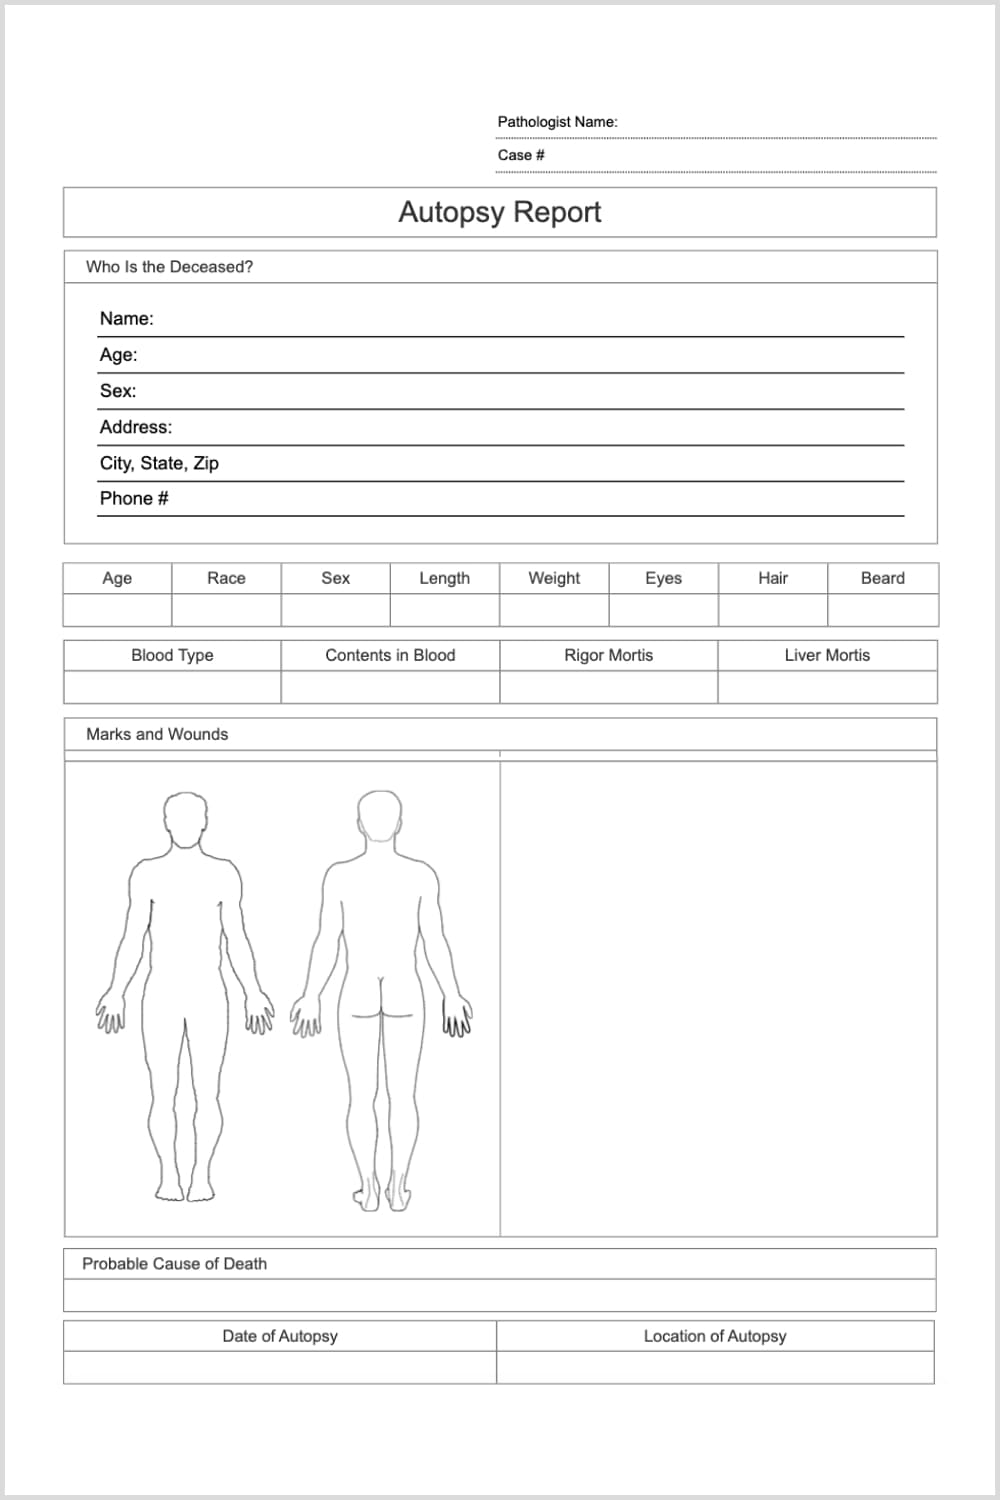 Autopsy report with tables and body drawing.